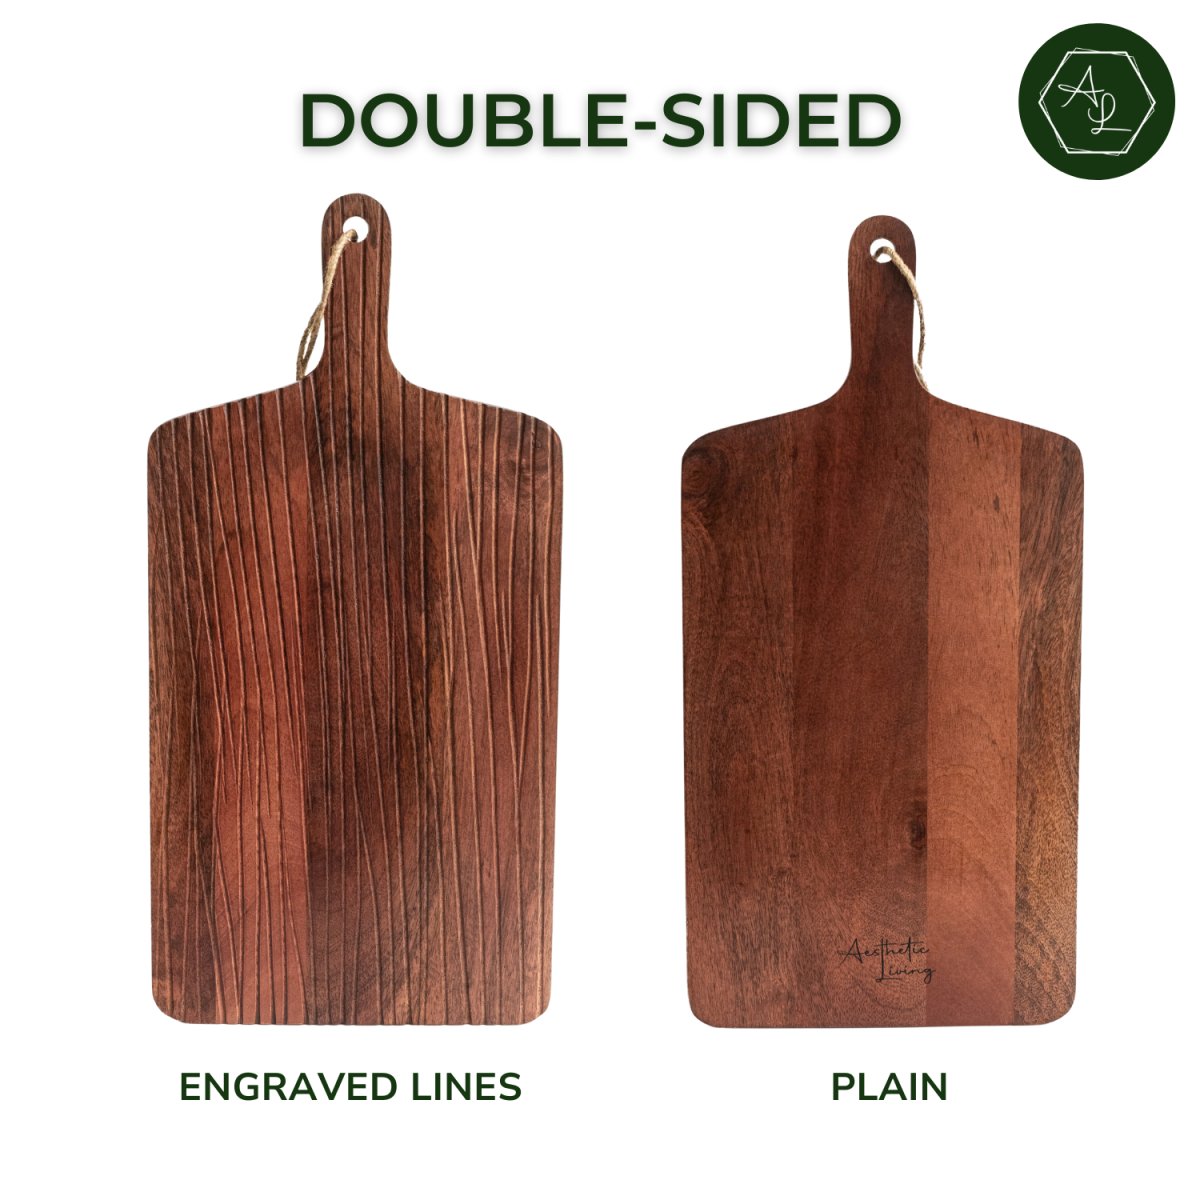 Large wooden board with engraved lines_Front and back_Double-sided - Aesthetic Living